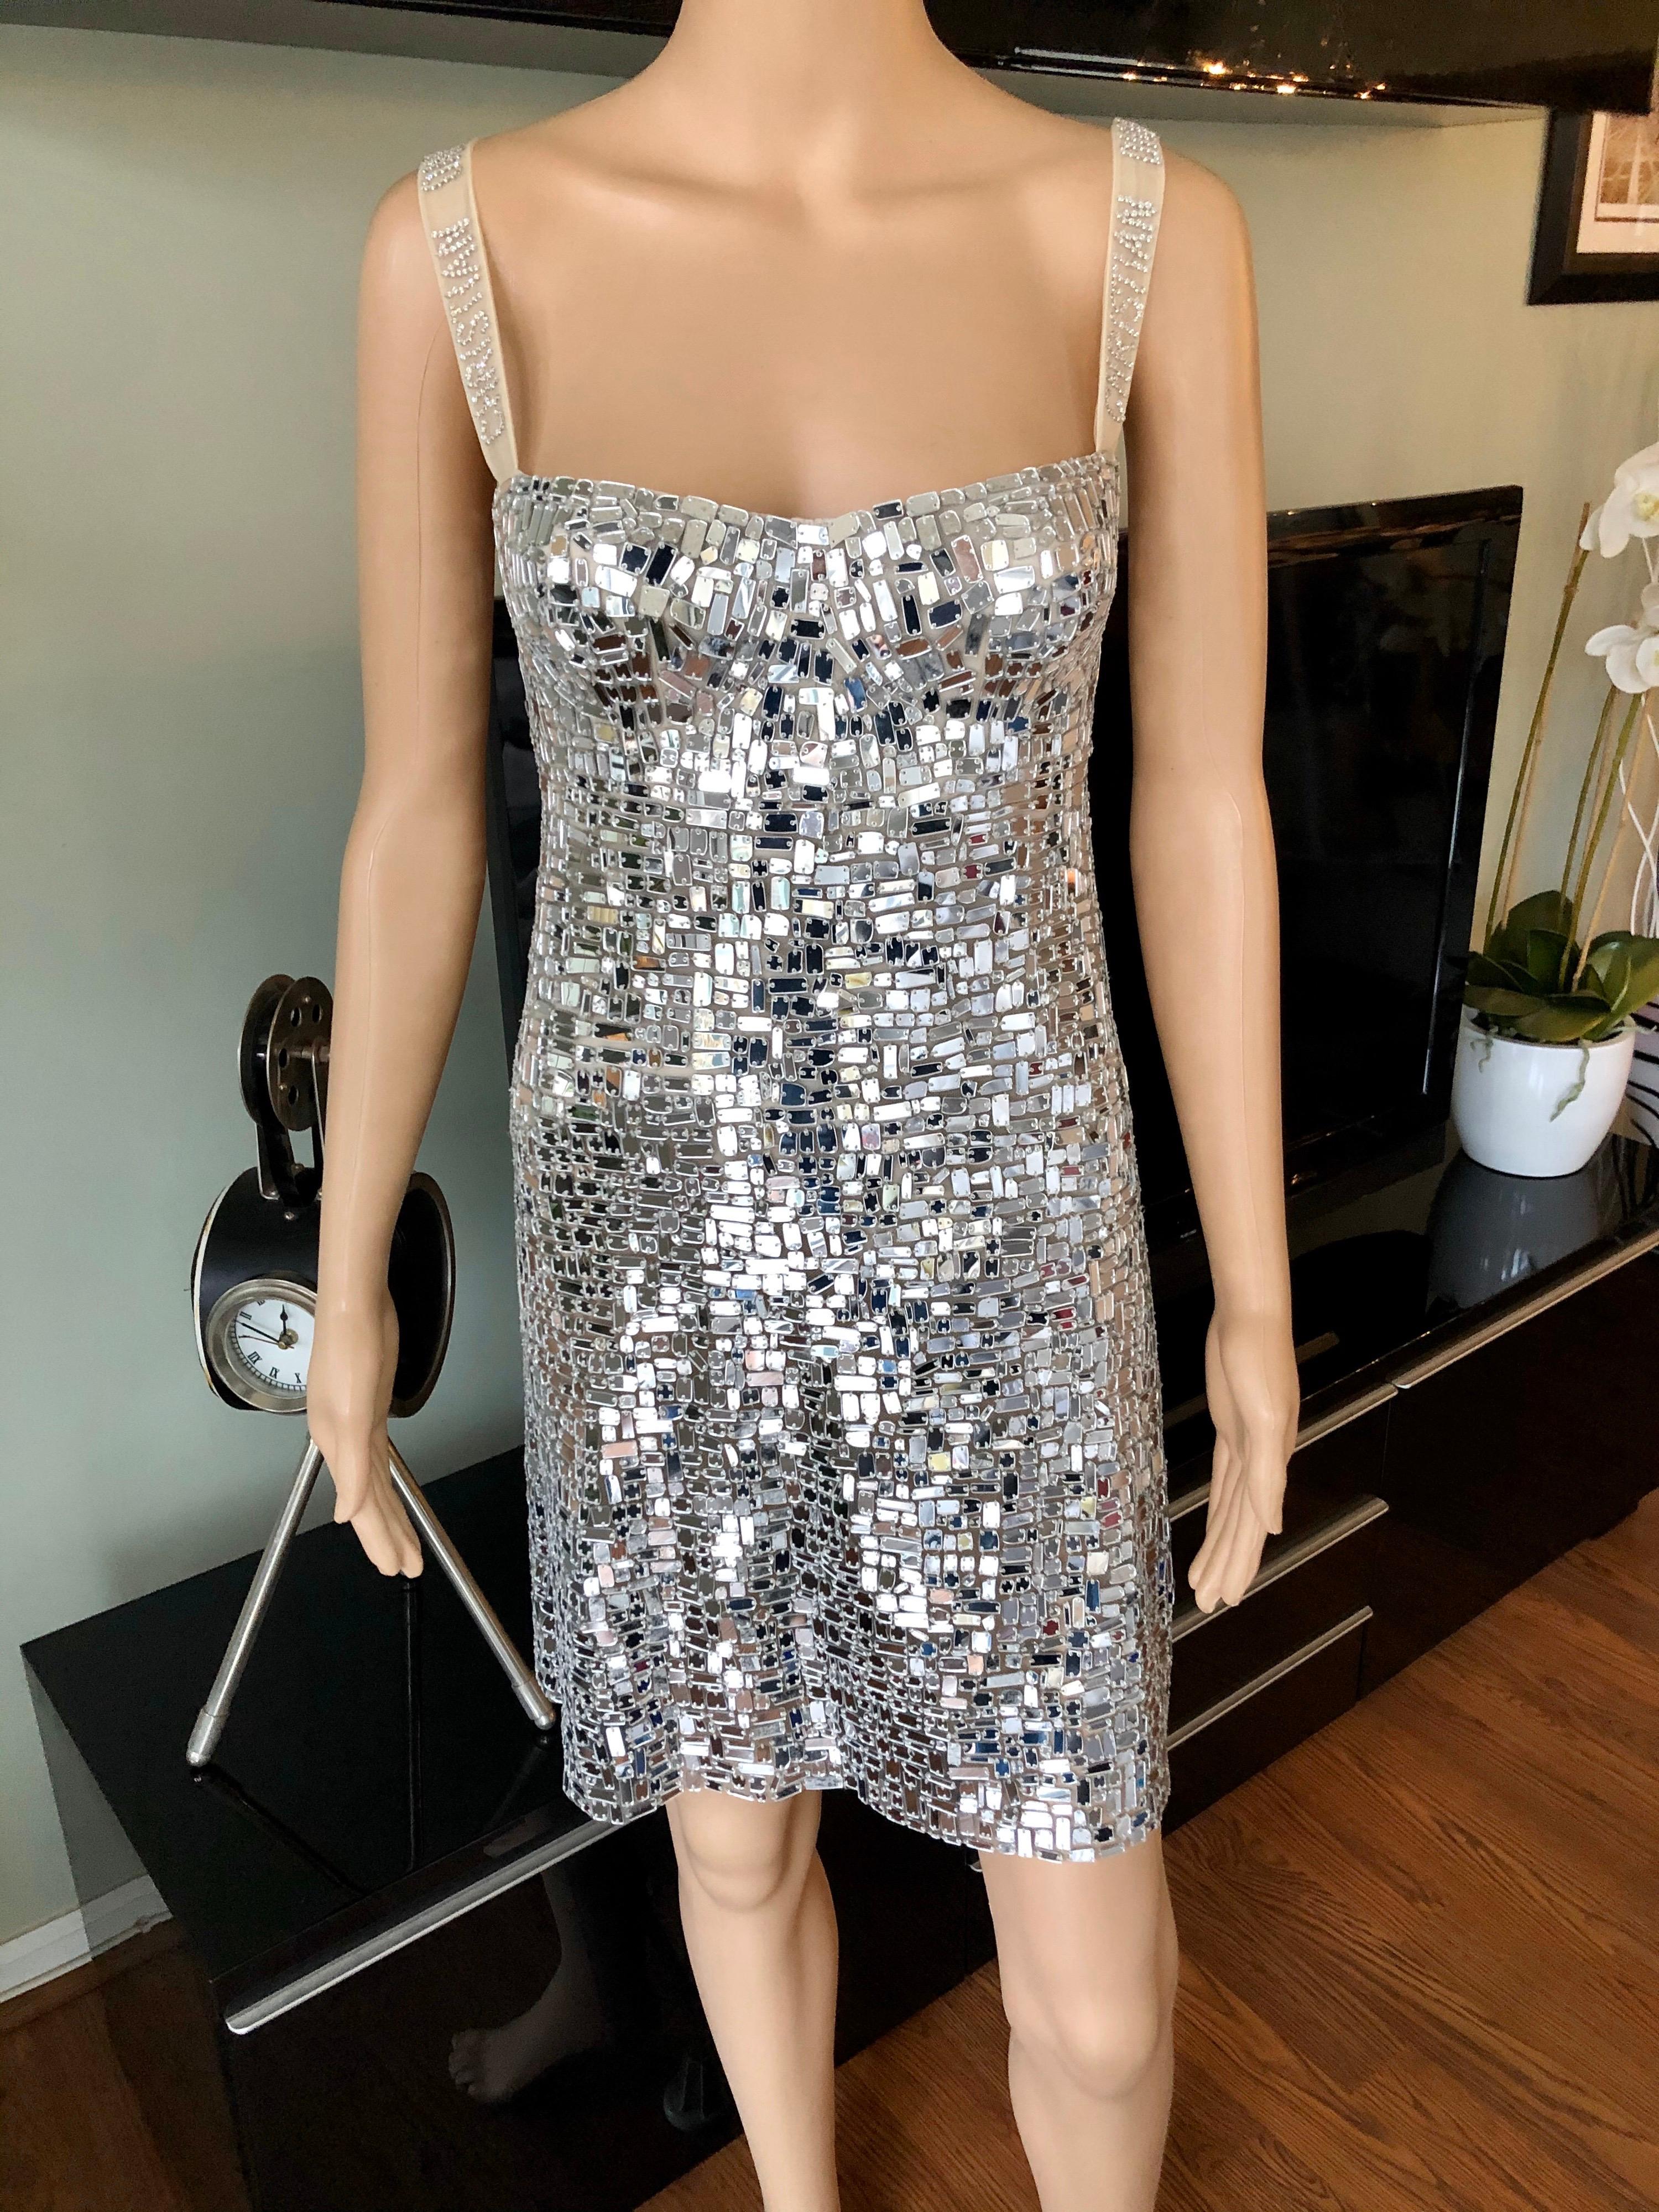 Christian Dior Runway Embellished Silver Mini Dress S

Christian Dior Runway Embellished Logo Silver Mini Dress

Christian Dior mini dress featuring rhinestone embellishments throughout and mesh accent crystal logo embellished straps. Please note